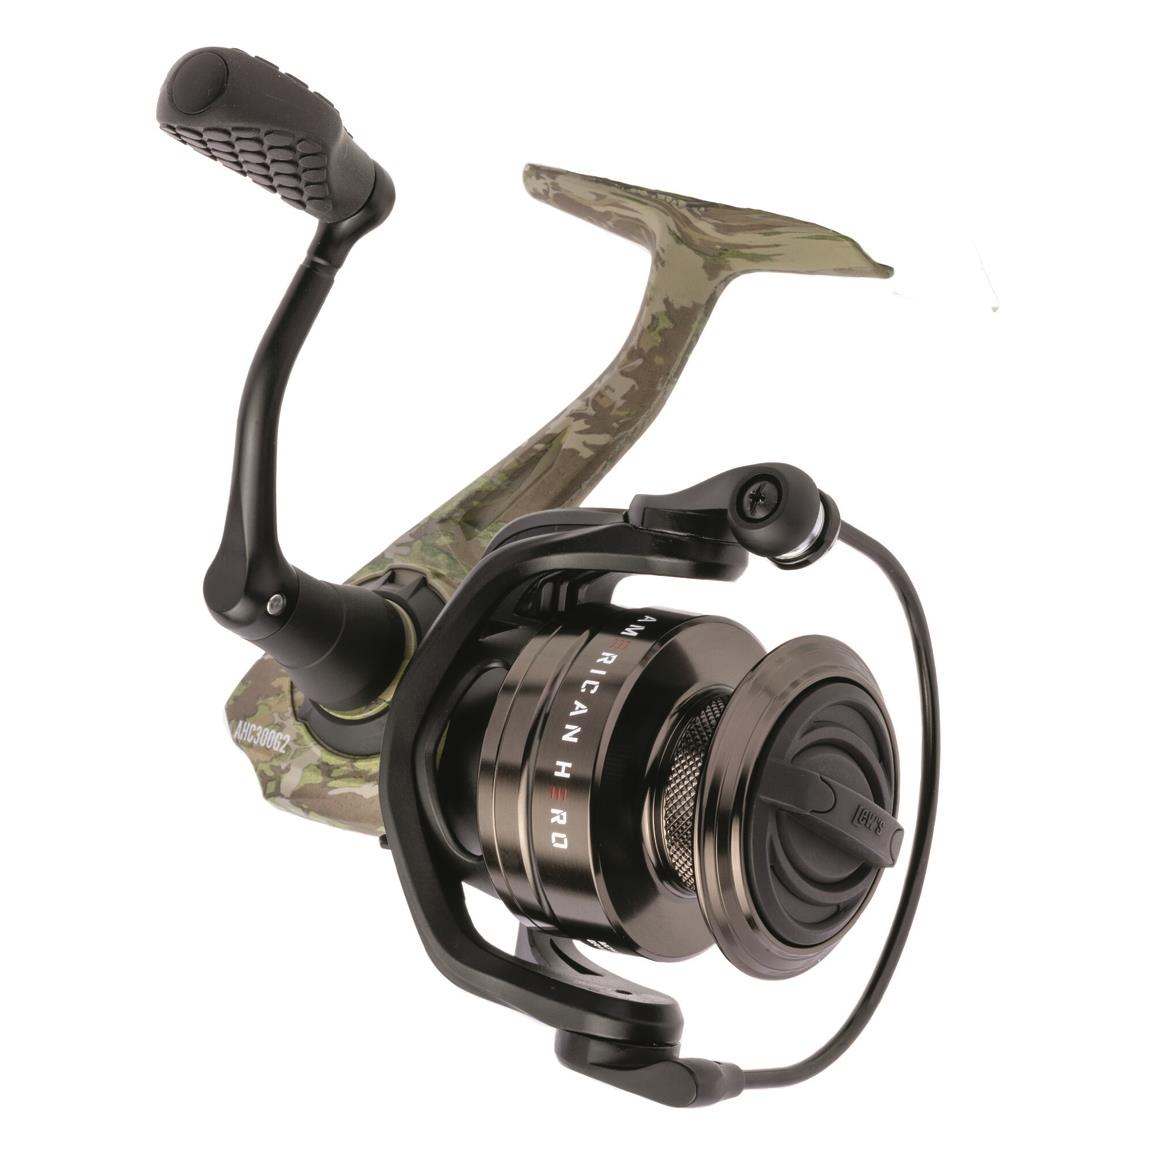 Guide Gear Core Angler Daiwa Fuego LT 2500 Spinning Combo - 735817